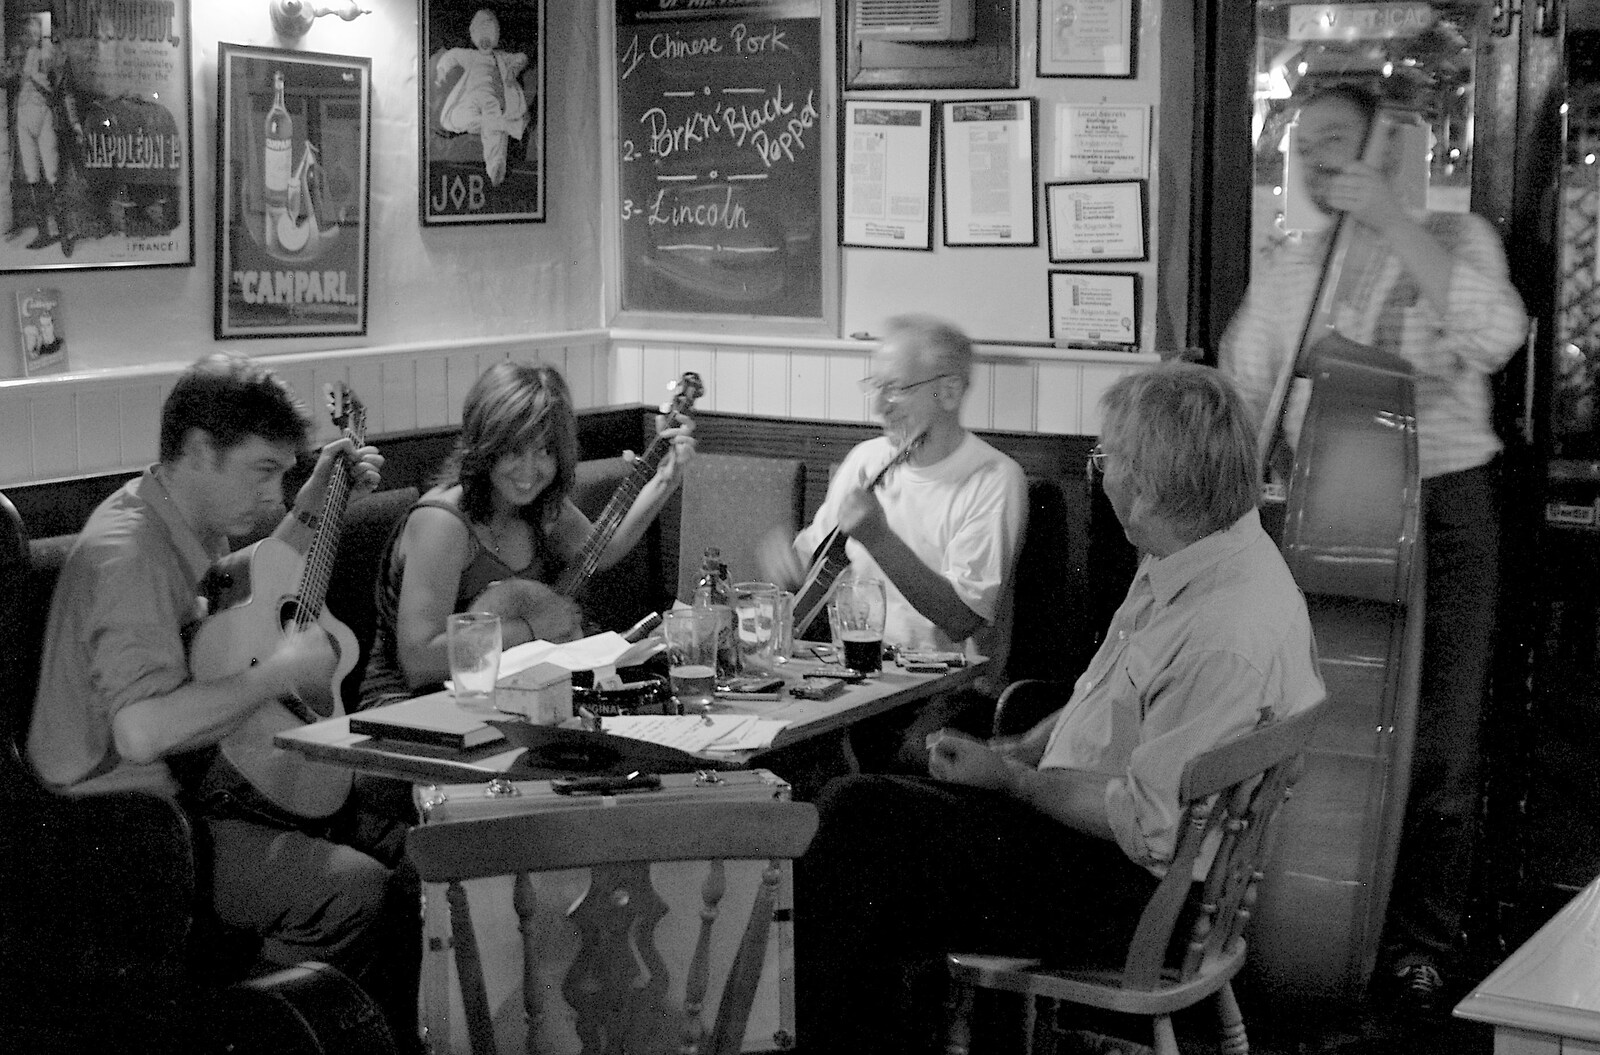 The folk group from Spiders, Norwich Science Festival and Kingston Arms Music - 5th September 2006